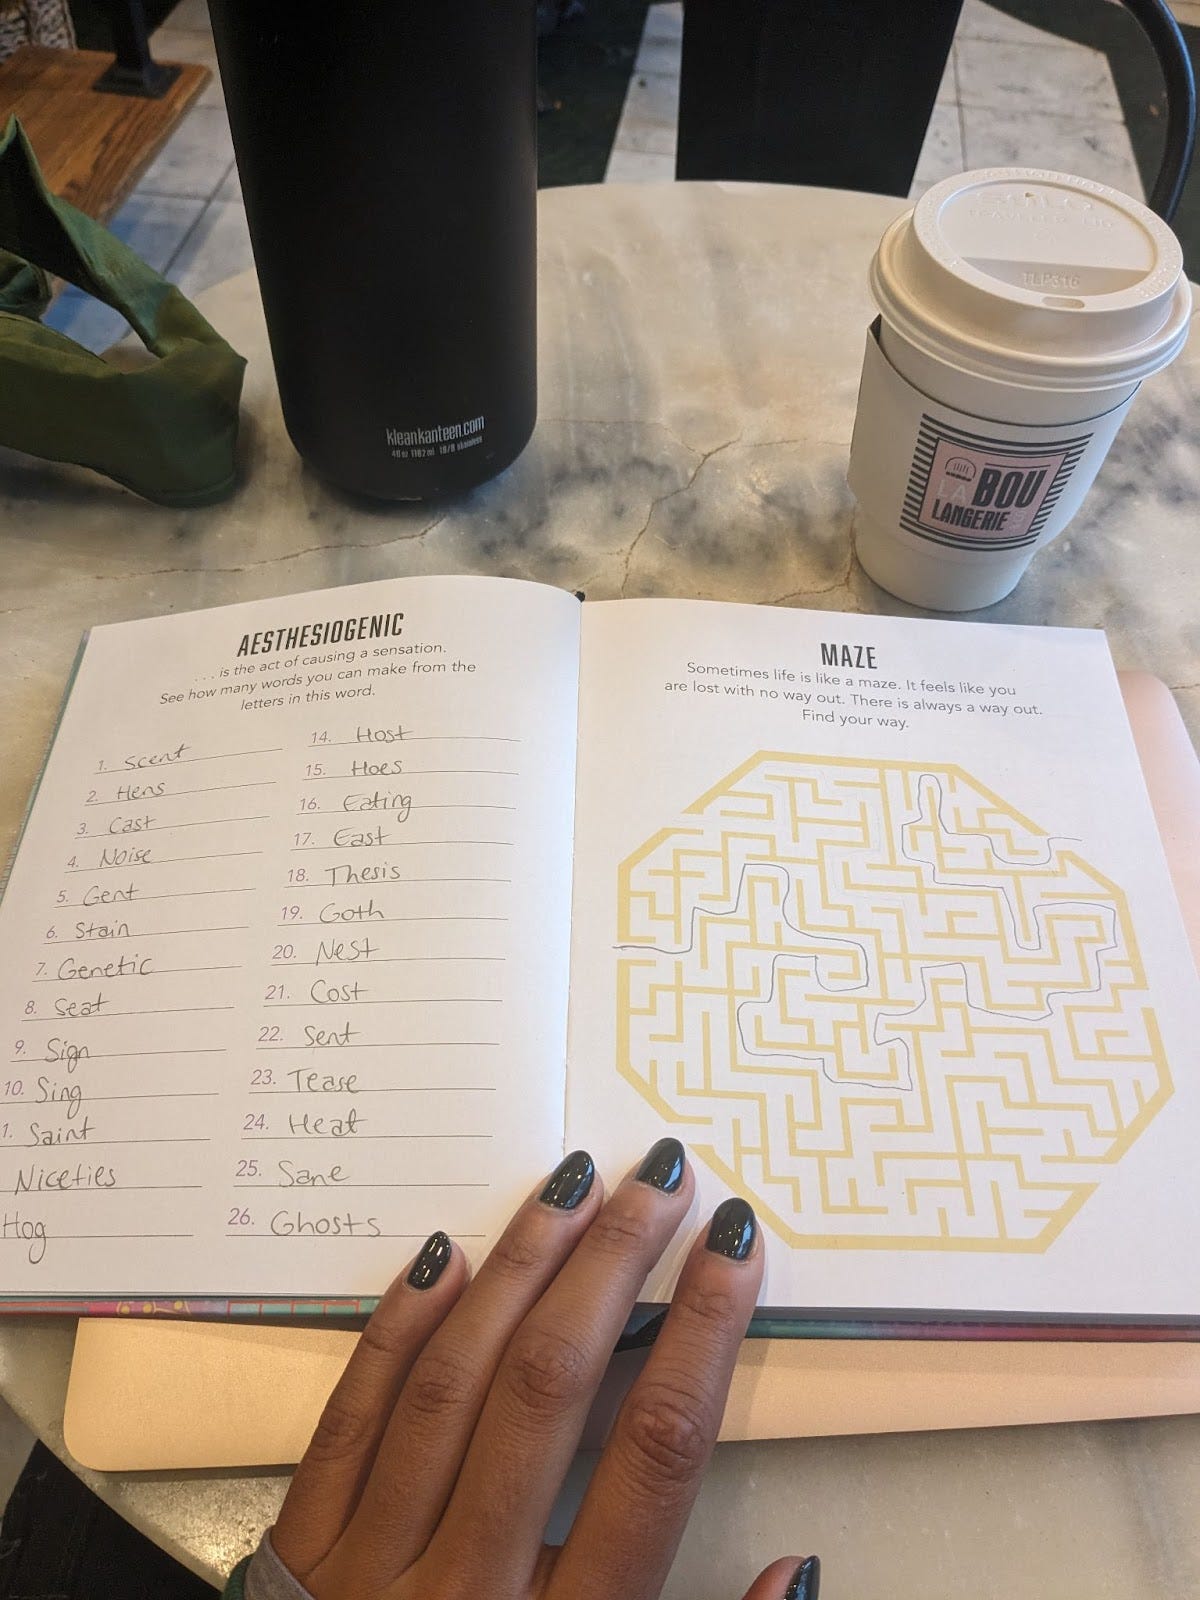 A book with the page turned to a word jumble page that Nathalie has filled out and the next page shows a yellow maze with pencil markings to shows how to escape the maze.